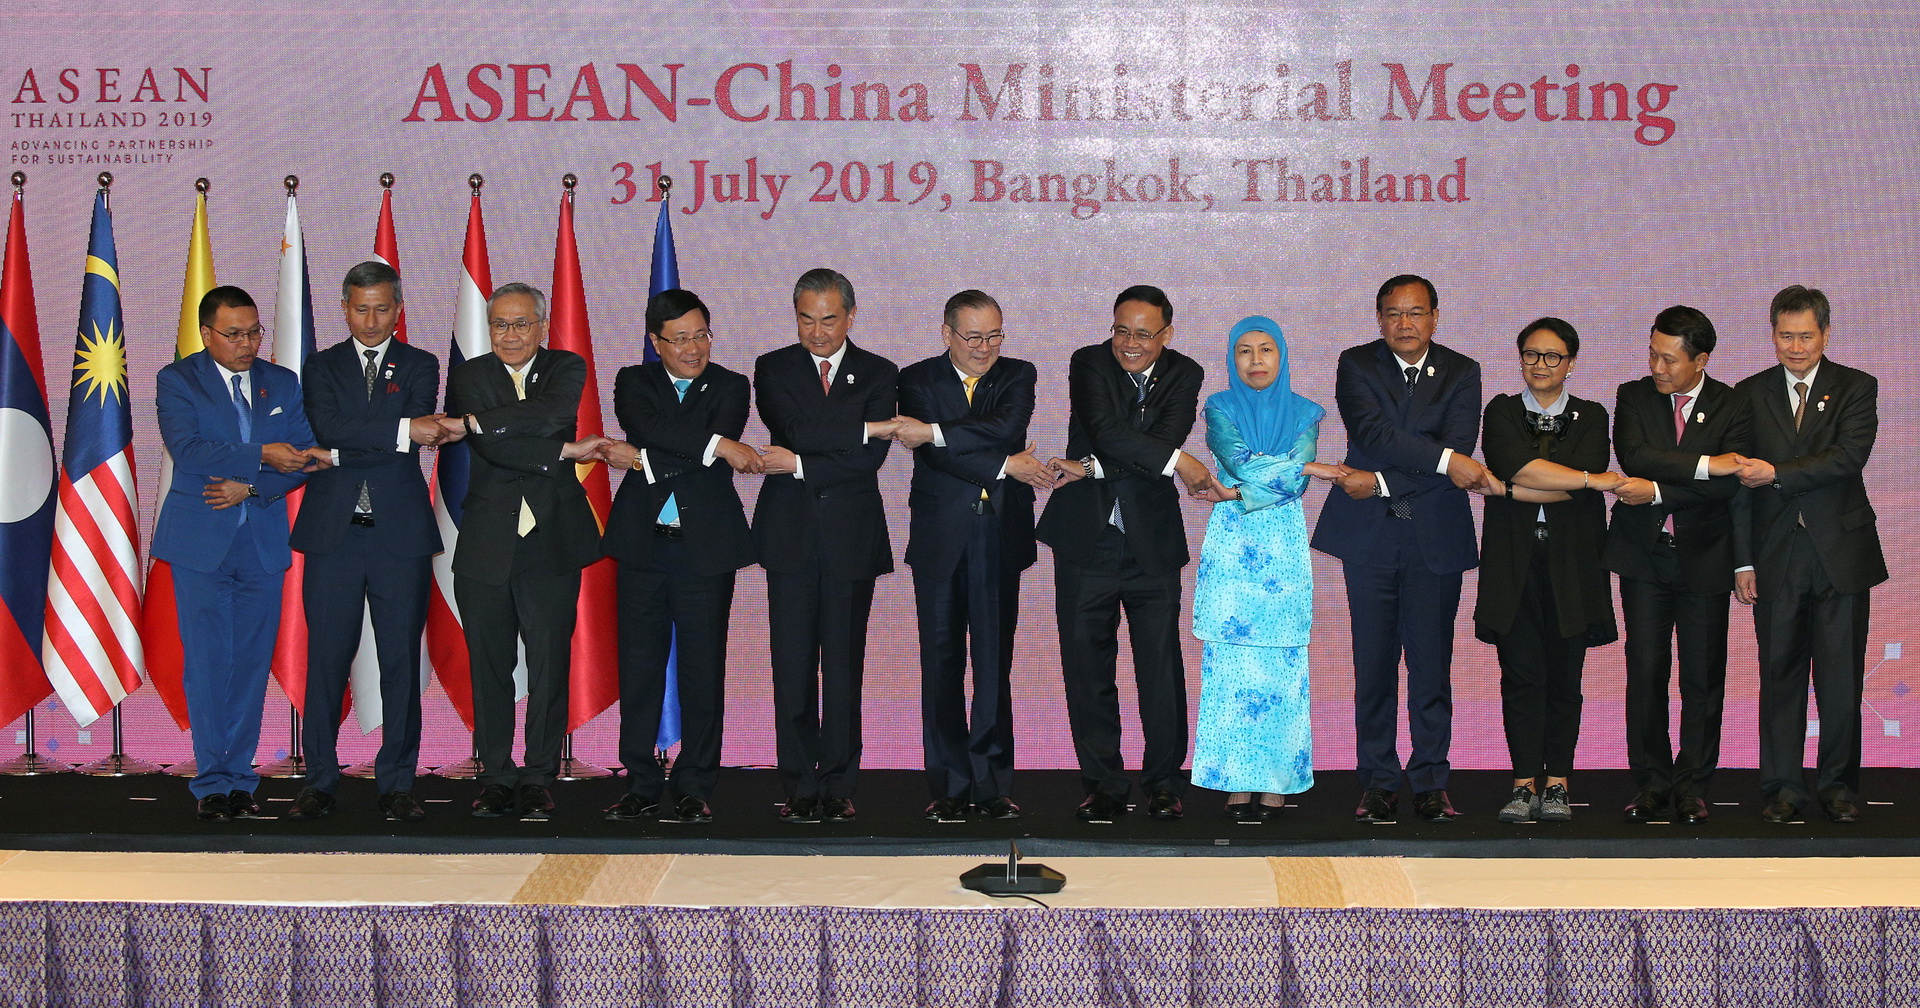 Vietnamese Deputy Prime Minister and Minister of Foreign Affairs Pham Binh Minh (fourth left), Chinese State Councilor and Minister of Foreign Affairs Wang Yi (fifth left) and delegates pose for a family photo at the ASEAN-China ministerial meeting in Bangkok, Thailand July 31, 2019. Photo: Reuters